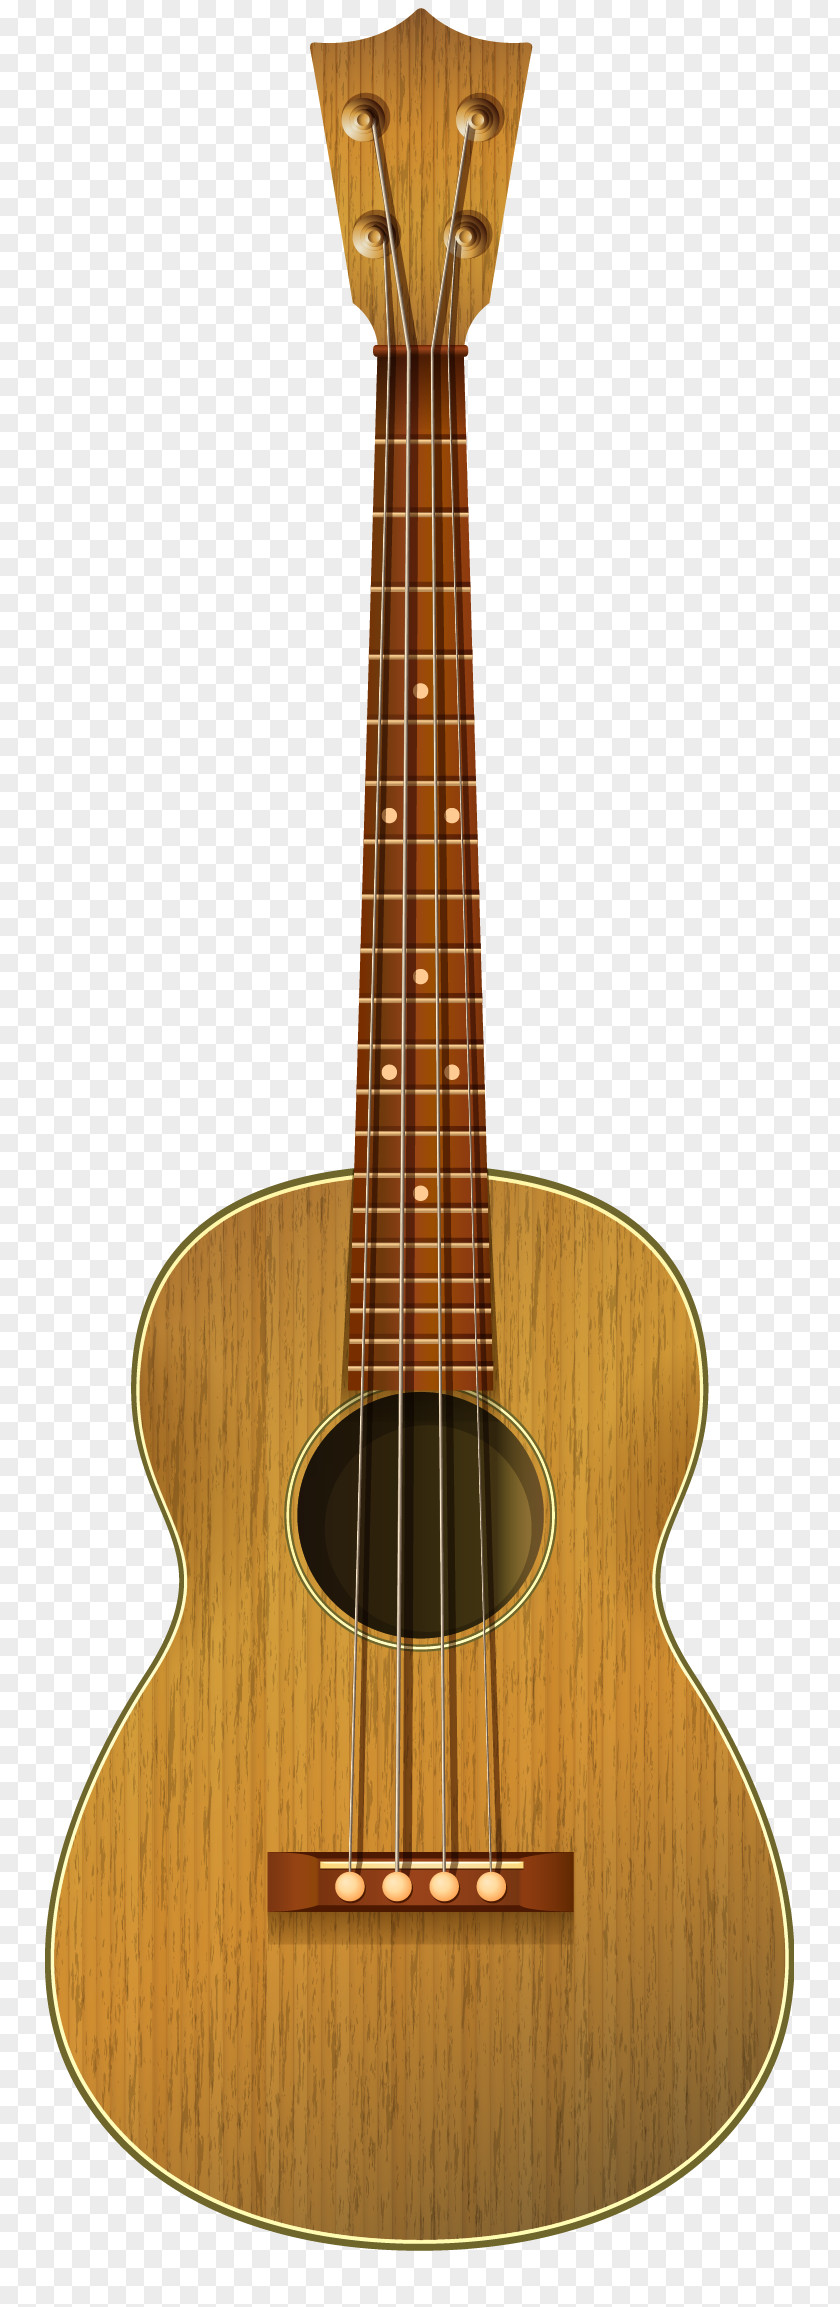 Vector Hand-painted Guitar Royalty-free Illustration PNG